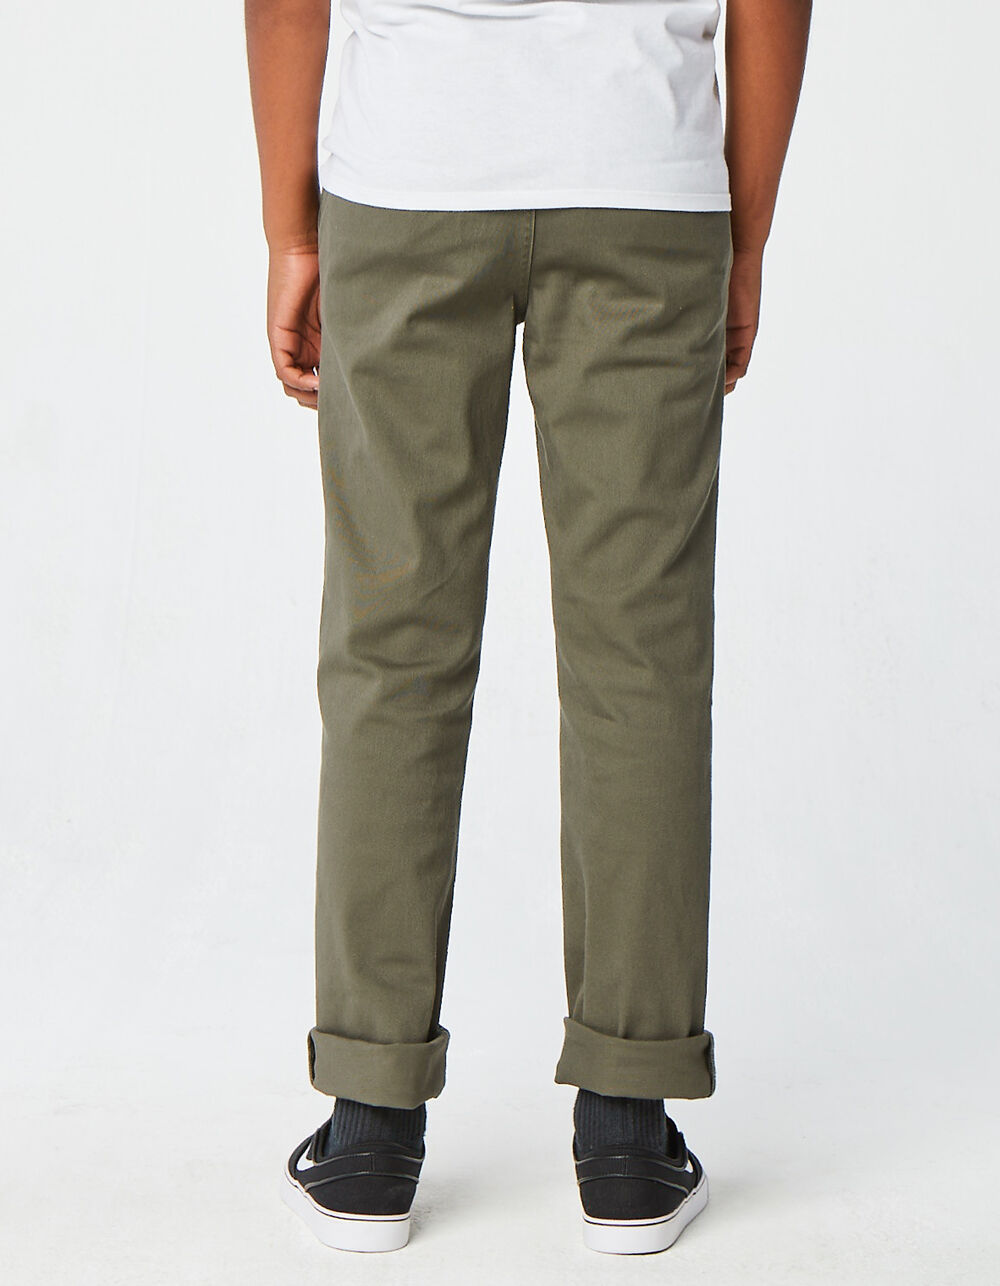 RSQ London Boys Ivy Skinny Stretch Chino Pants image number 3